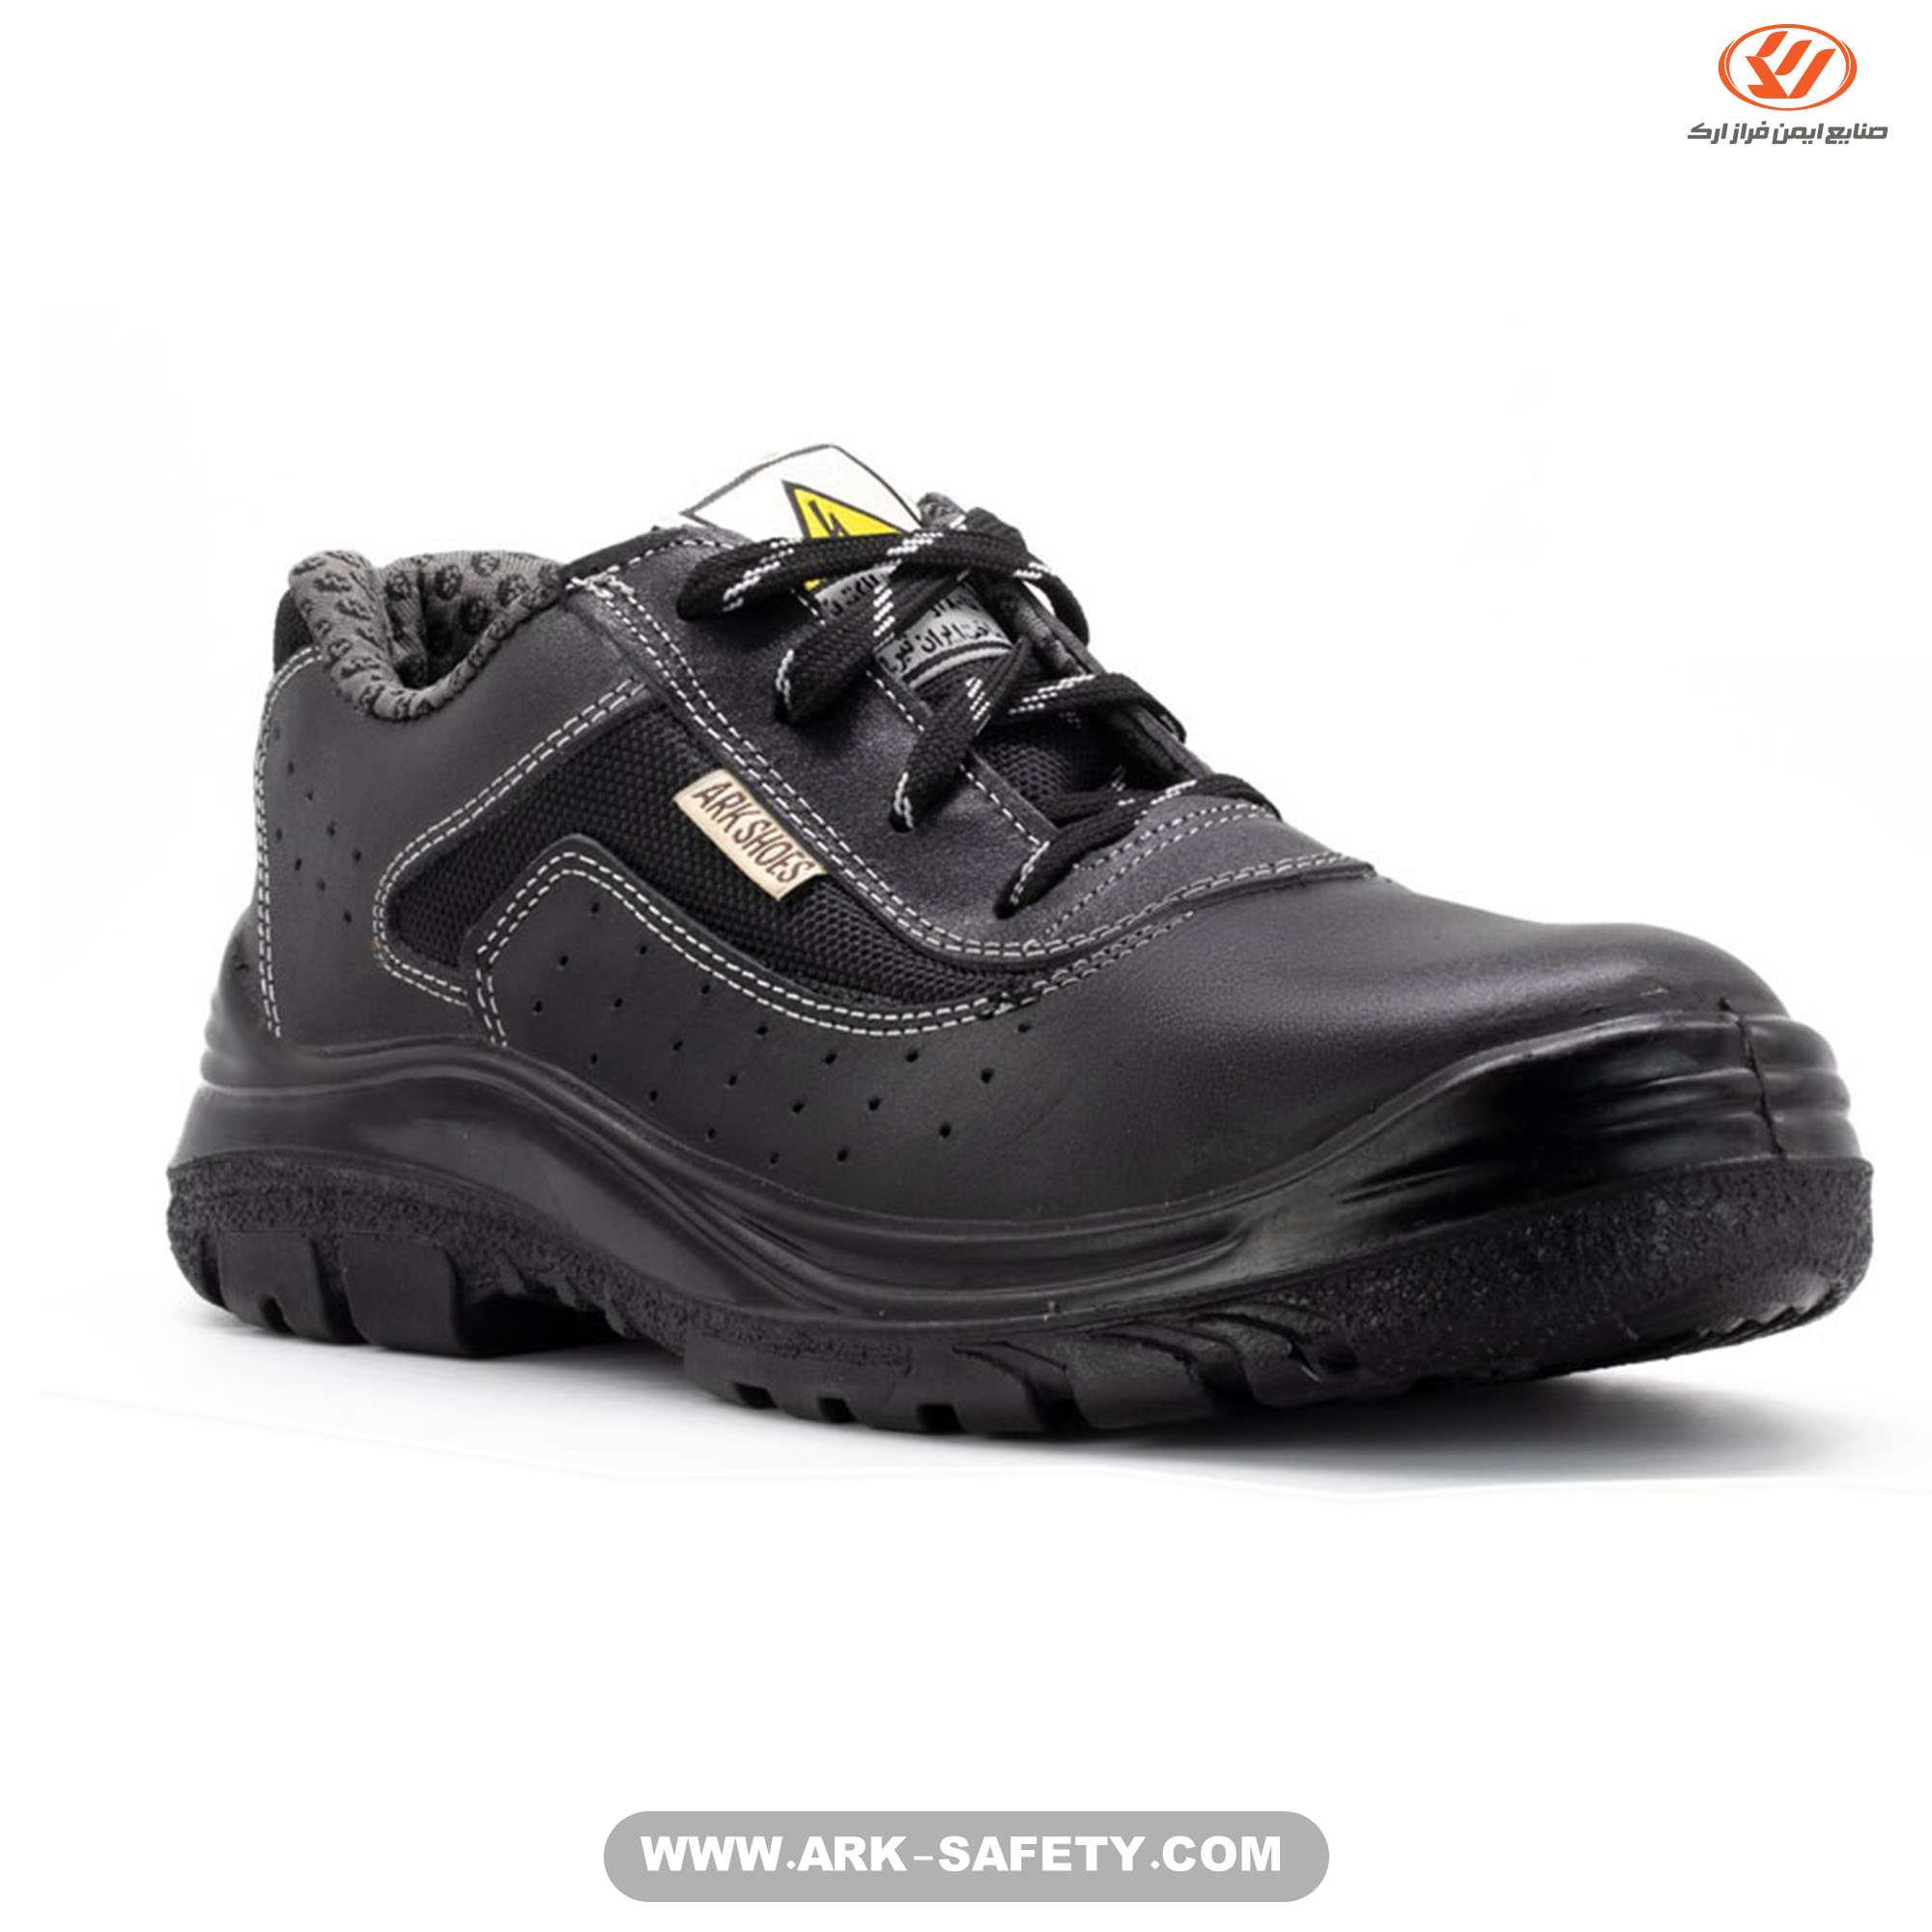 Rima Electrical Insulation Shoes